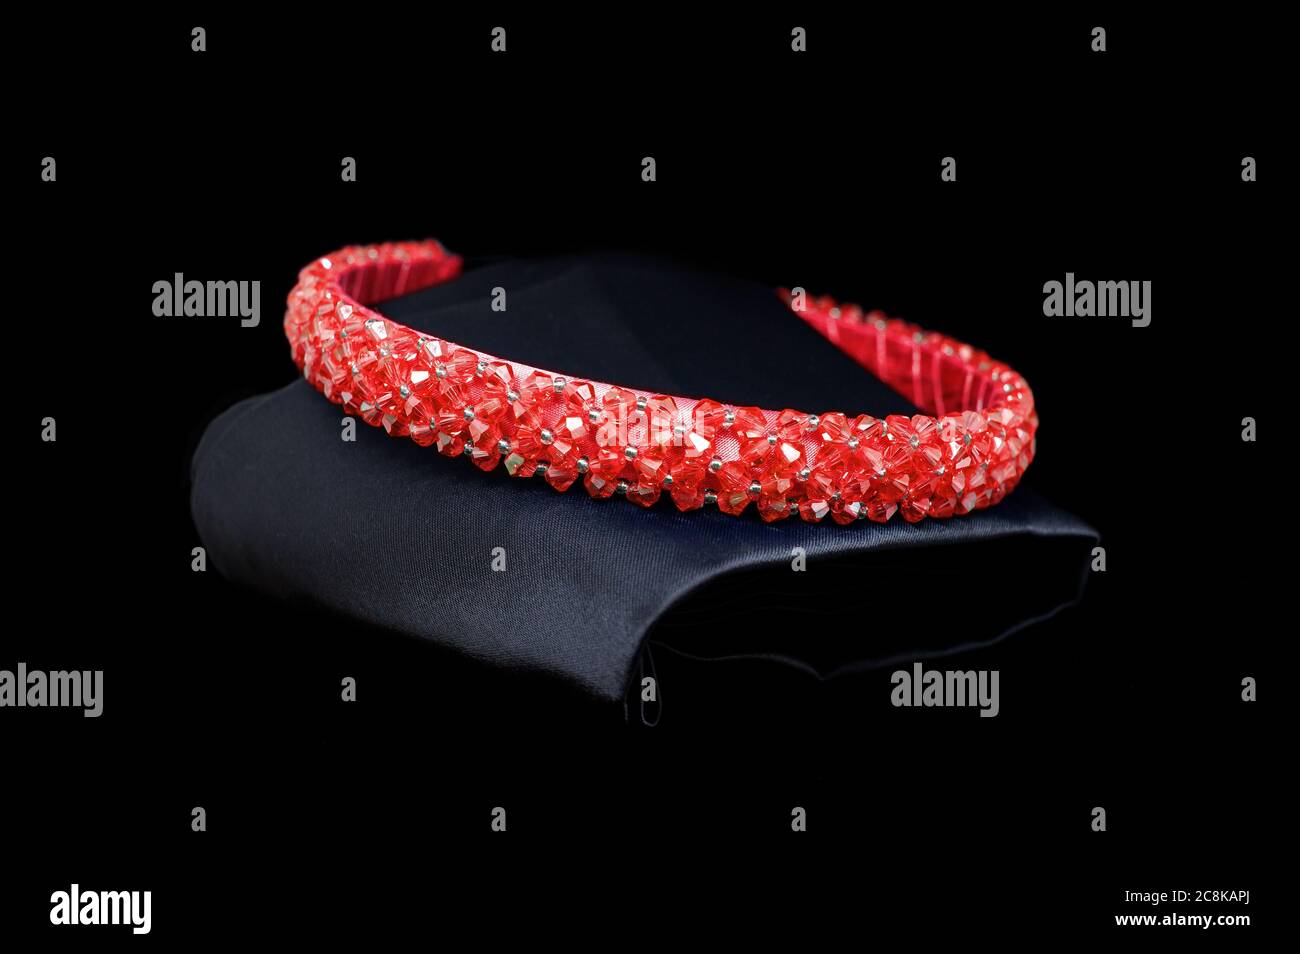 Red ruby tiara gemstones diamonds hair band on black background. Jewelry display isolated concept Stock Photo